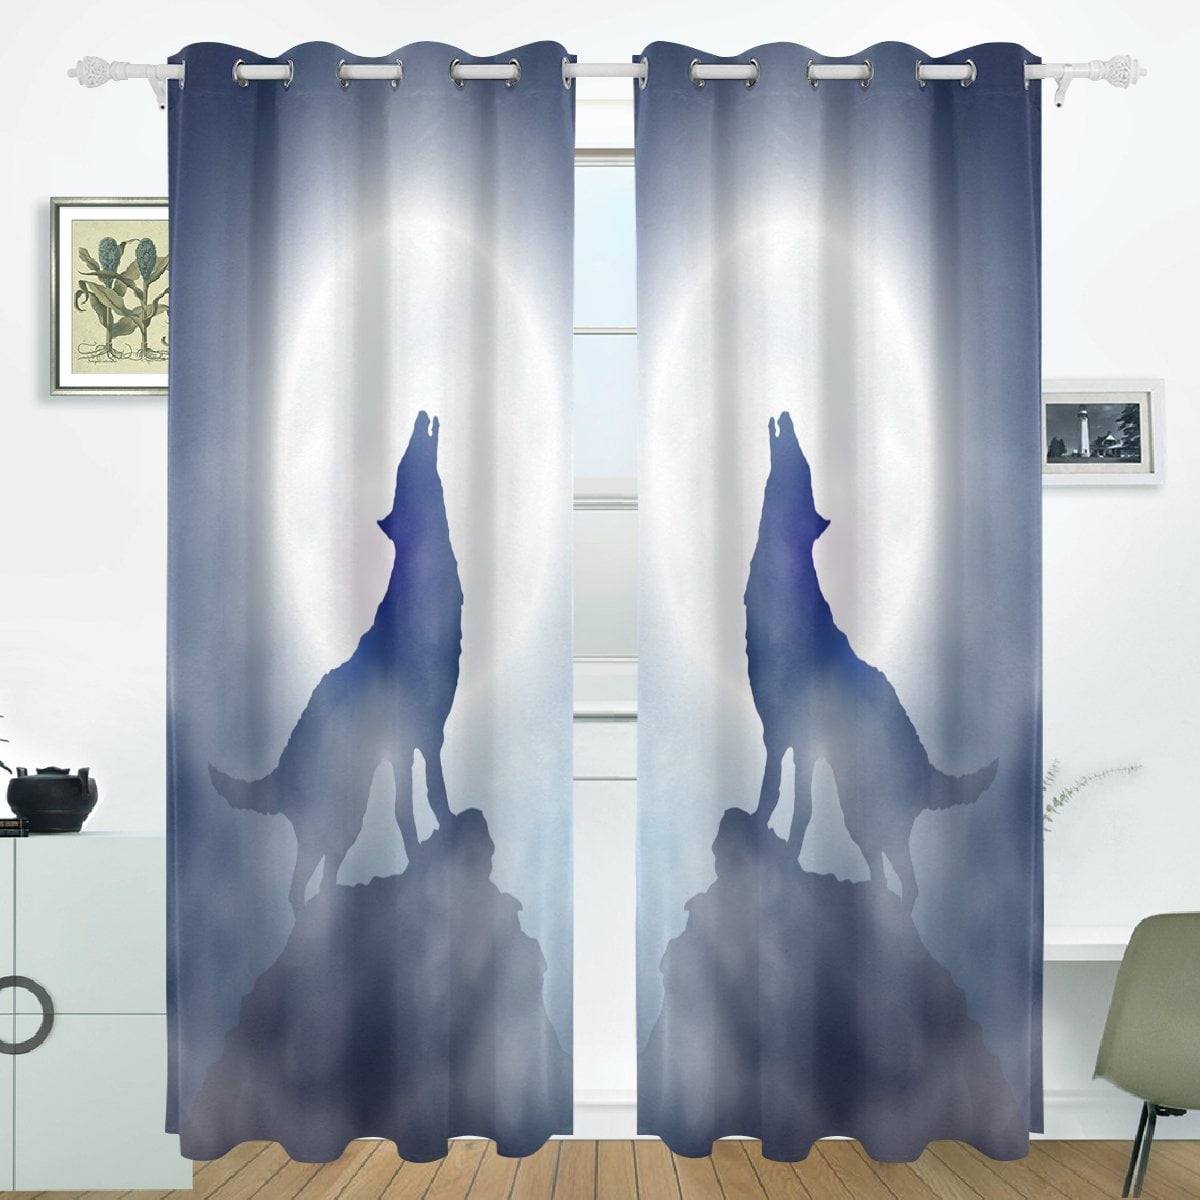 Night Guardian By Jojoesart Bedroom Curtain Wolf Could Blackout Luxury Curtains 